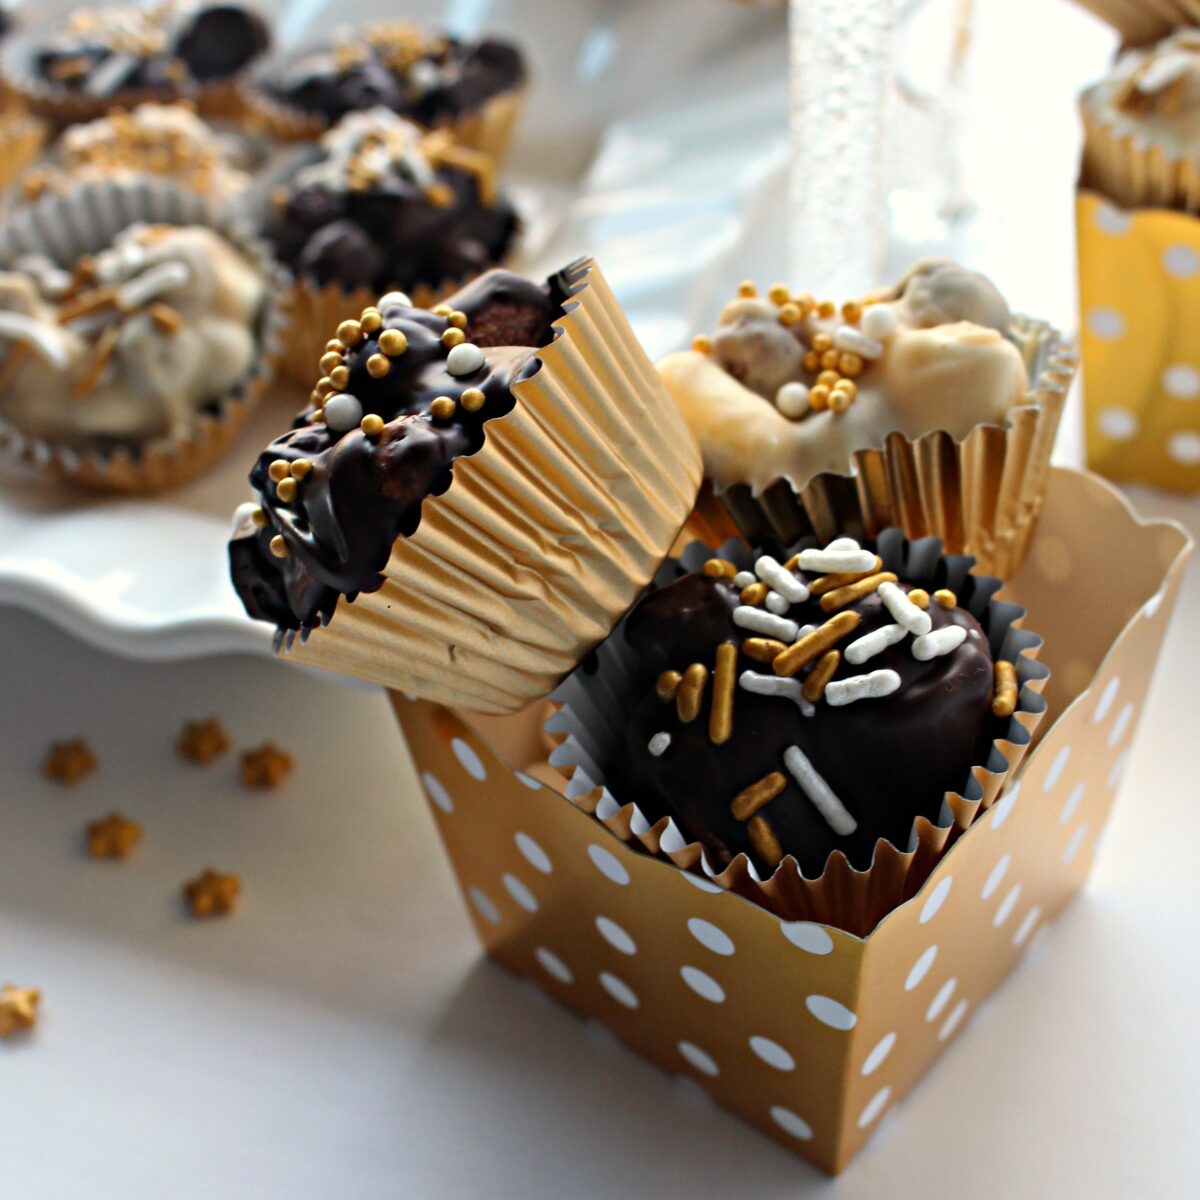 Two No Bake Chocolate Peanut Butter Cookies in a gold and white polka dot candy cup.